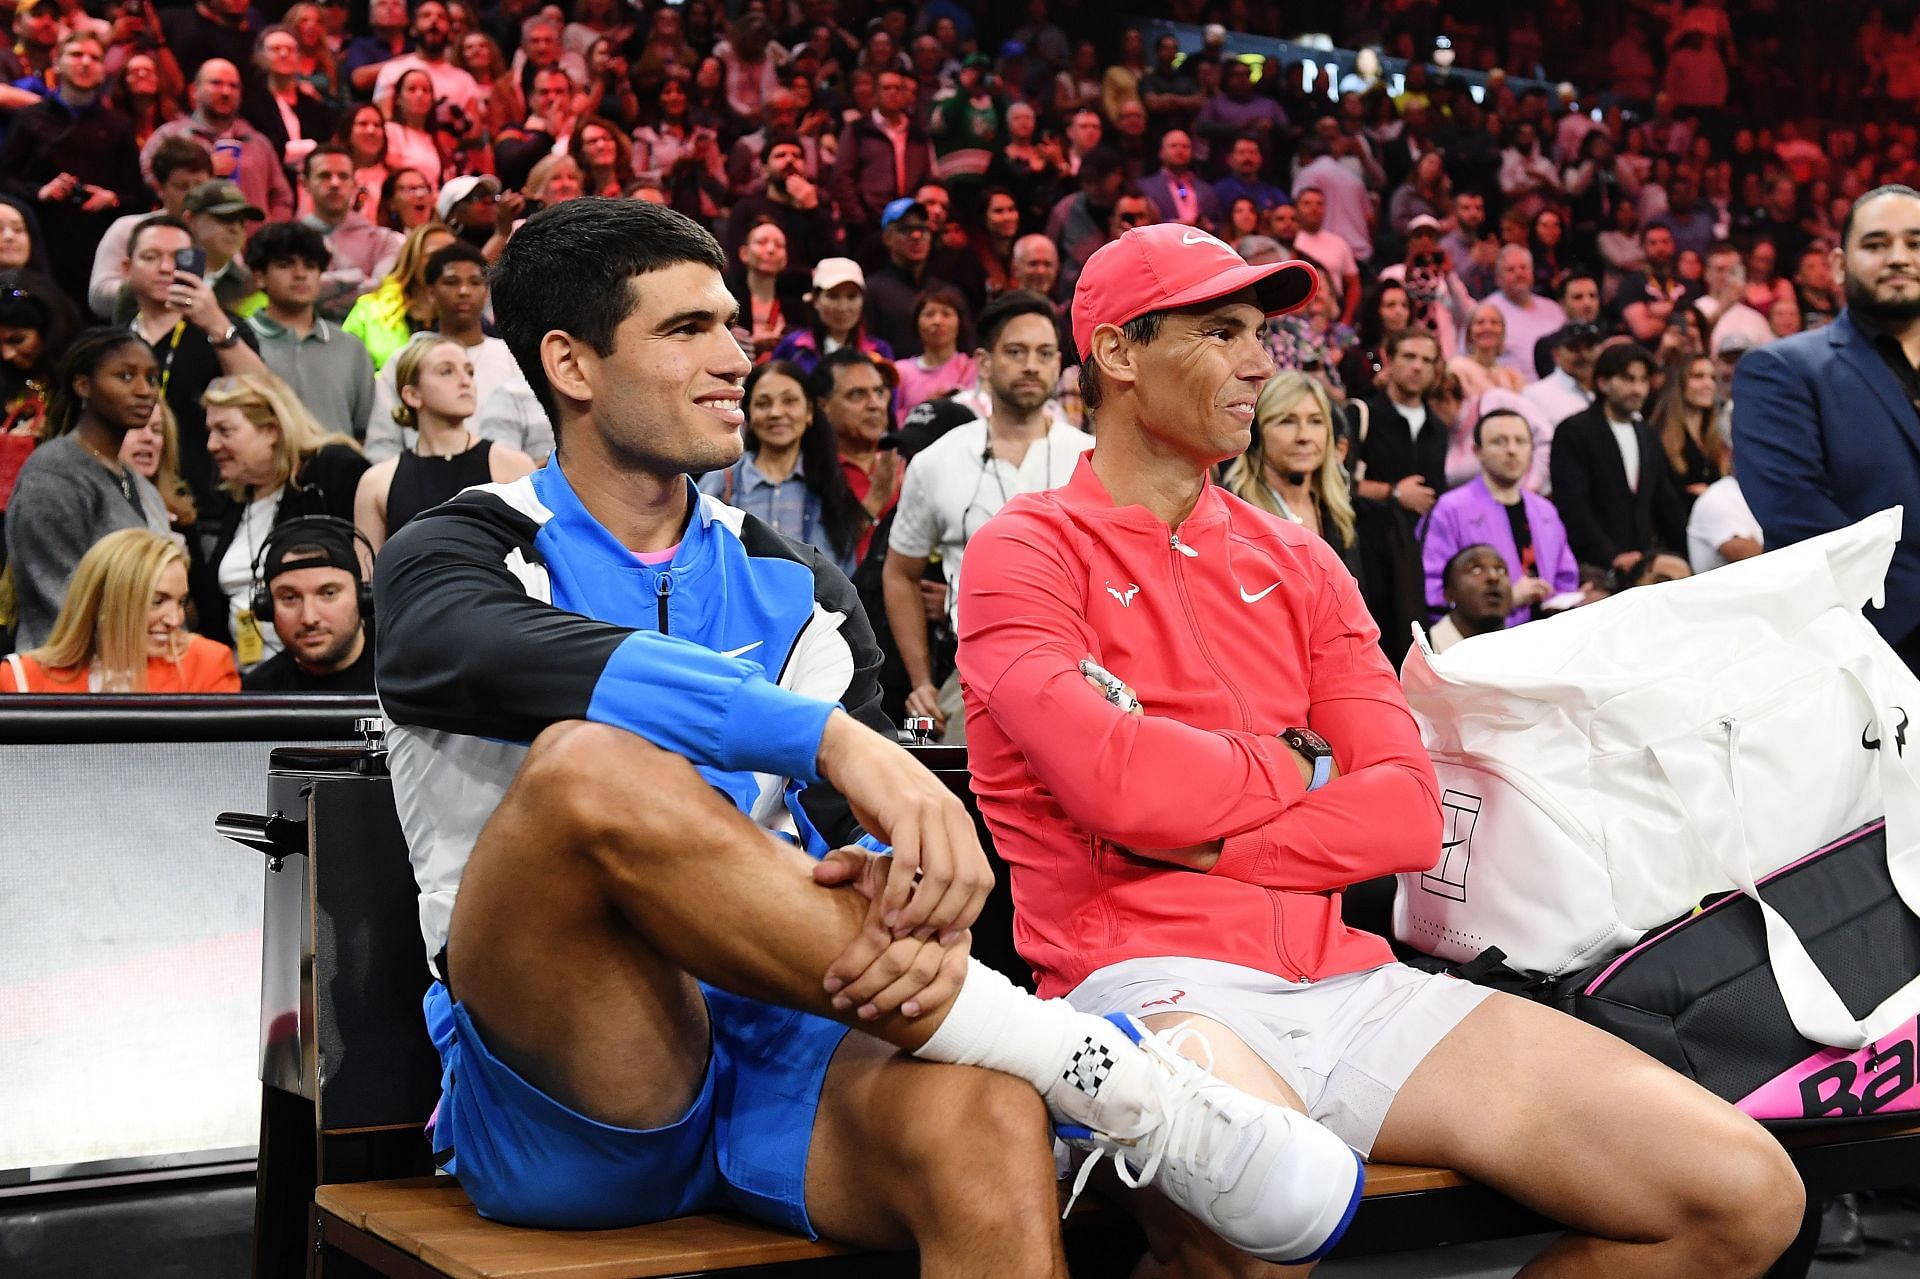 The two Spaniards at the Netflix Slam